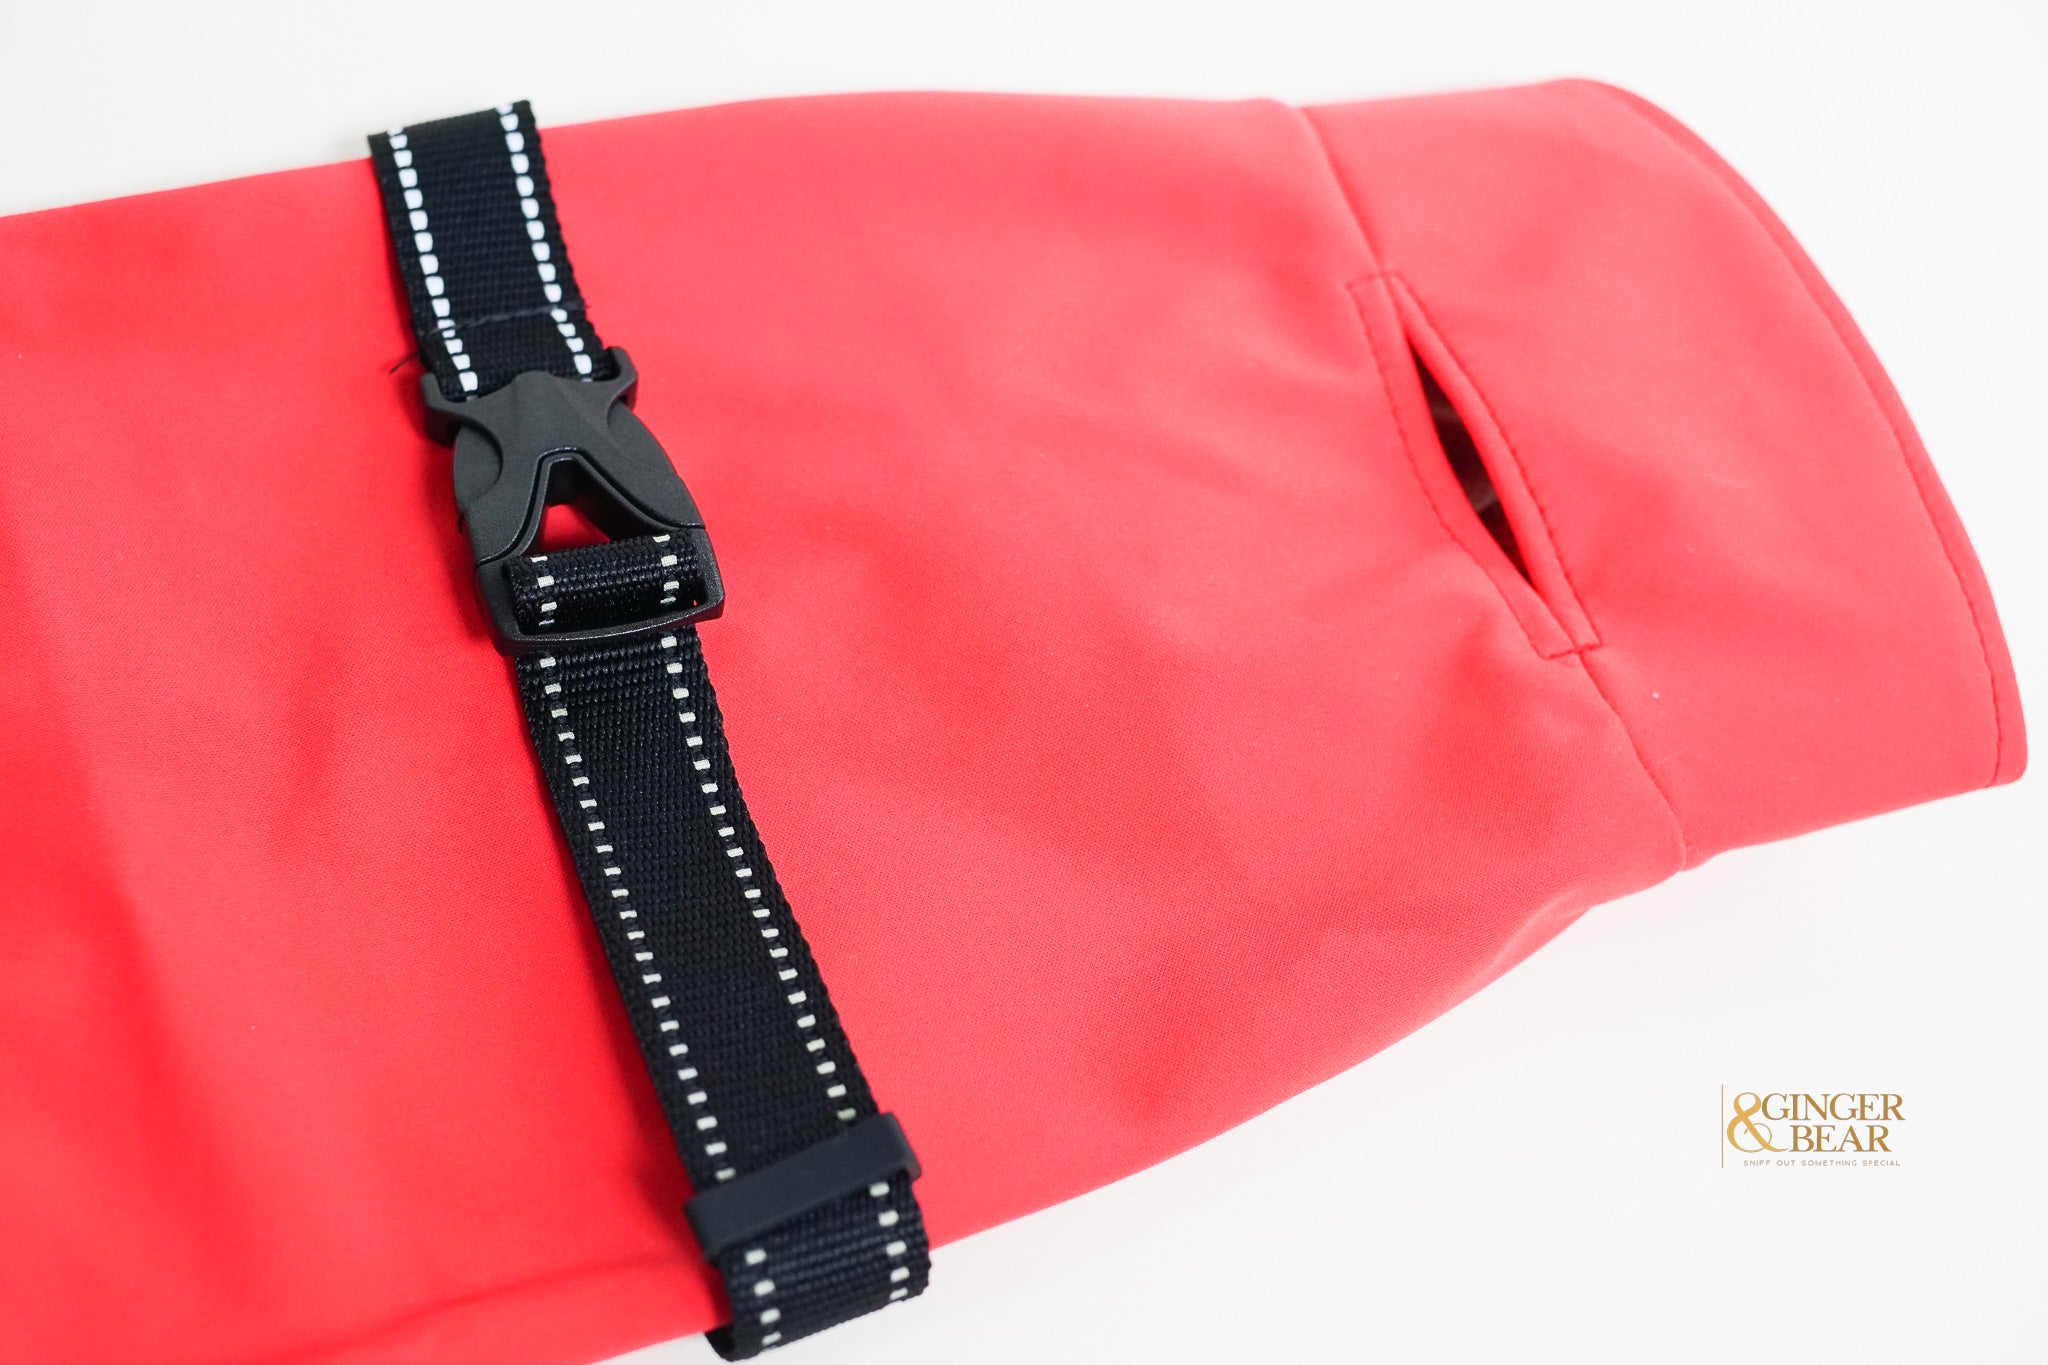 The Rain Paw, raincoat for Dogs, in Red and Graphite